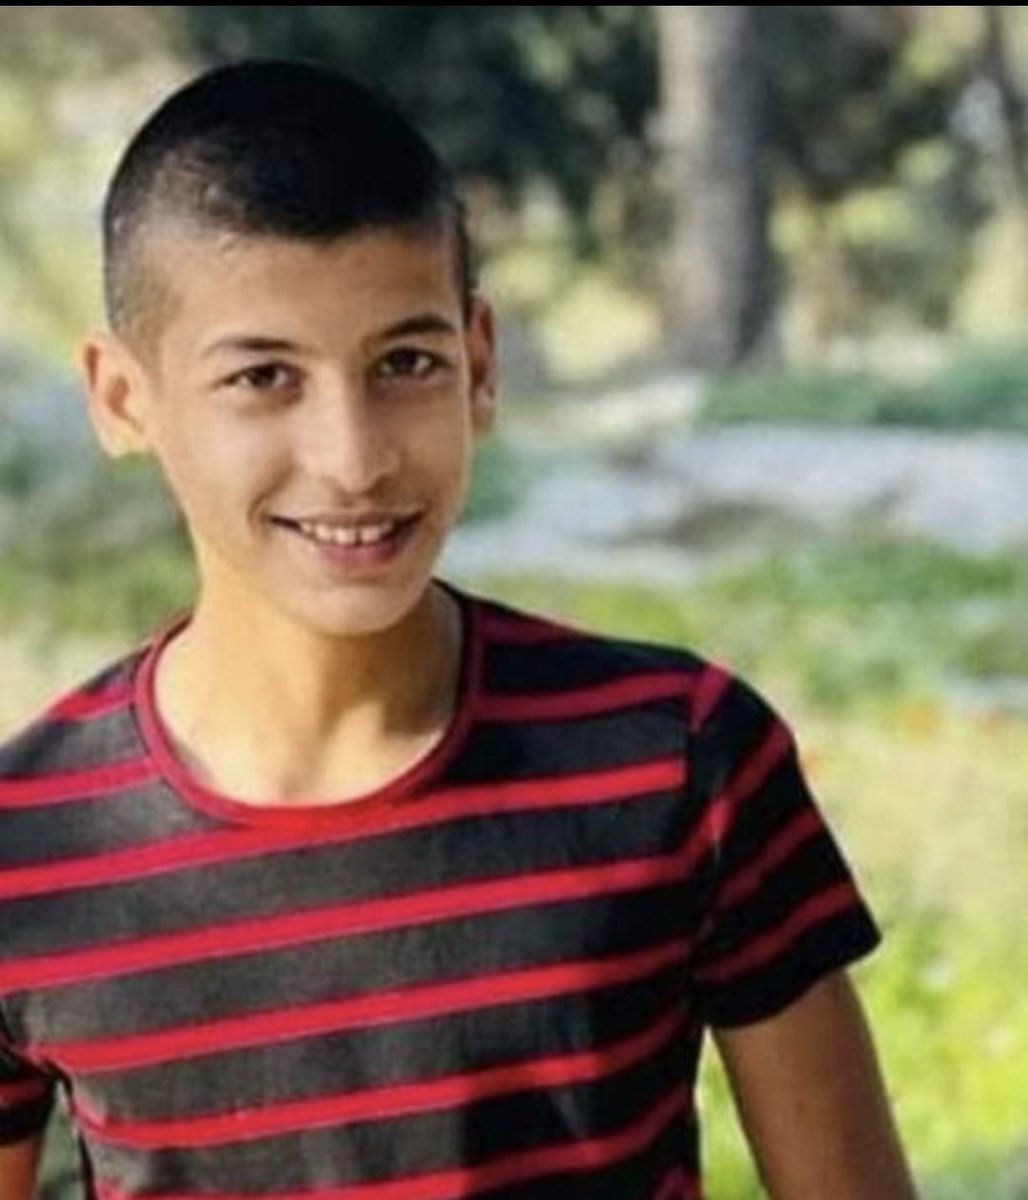 Yesterday morning, Israeli gangs shot 15-year-old Ahmad Yousef  Saqer with live ammunition  from inside a military vehicle during their Nazi incursion into Jenin refugee camp.
End #IsraeliTerrorism 
#PalestinianLivesMatter